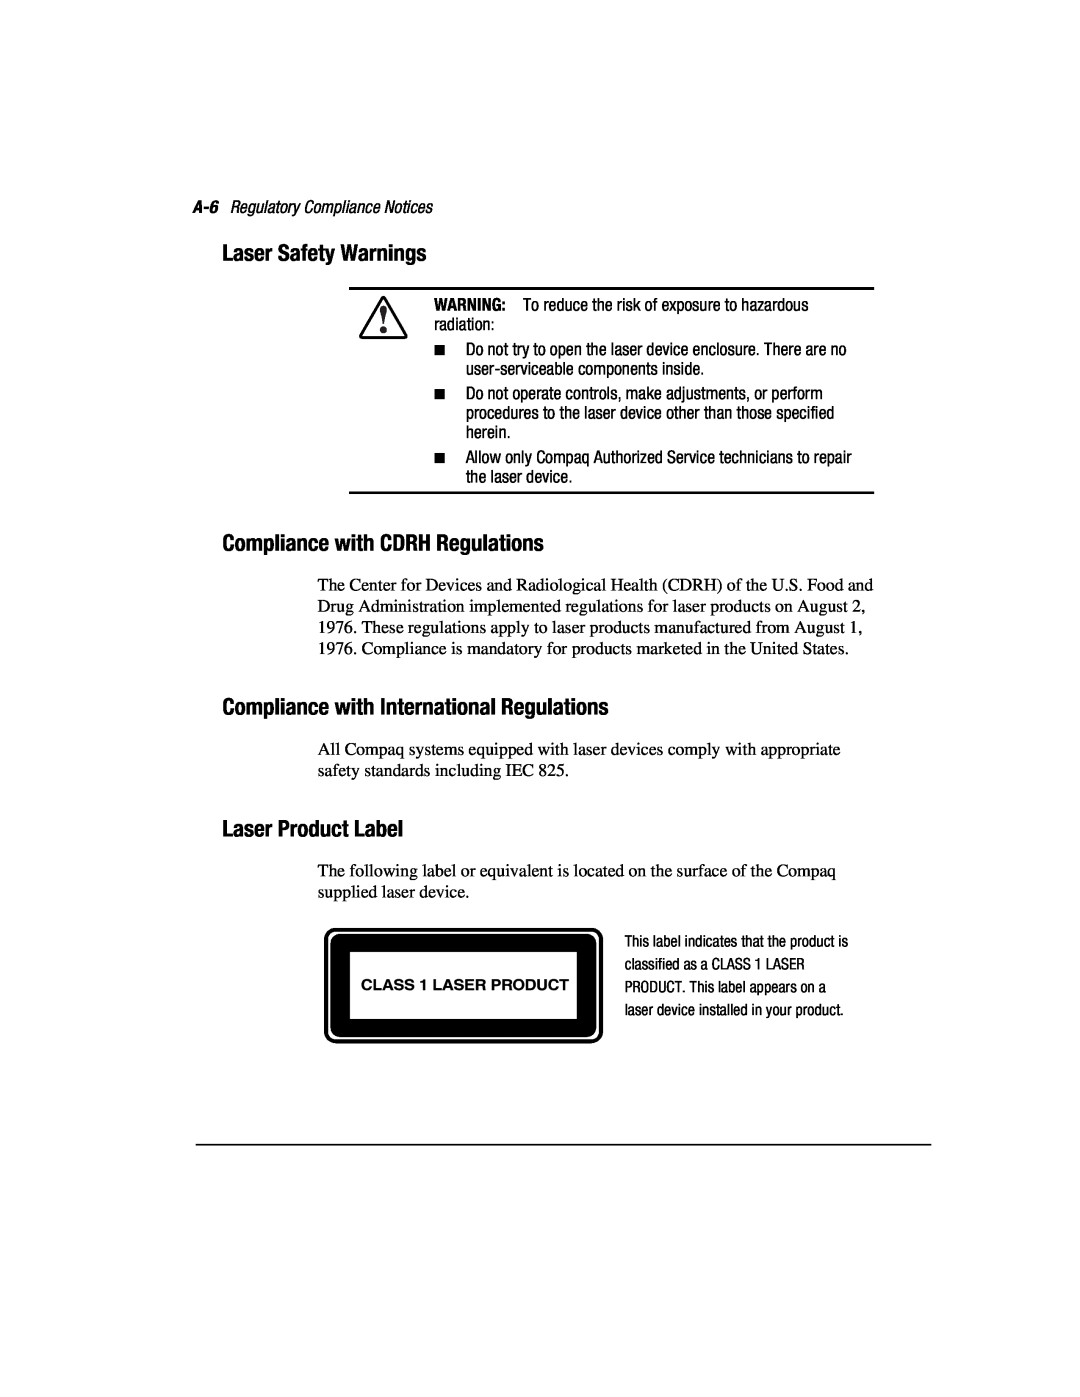 Compaq 3200 manual Laser Safety Warnings, Compliance with CDRH Regulations, Compliance with International Regulations 